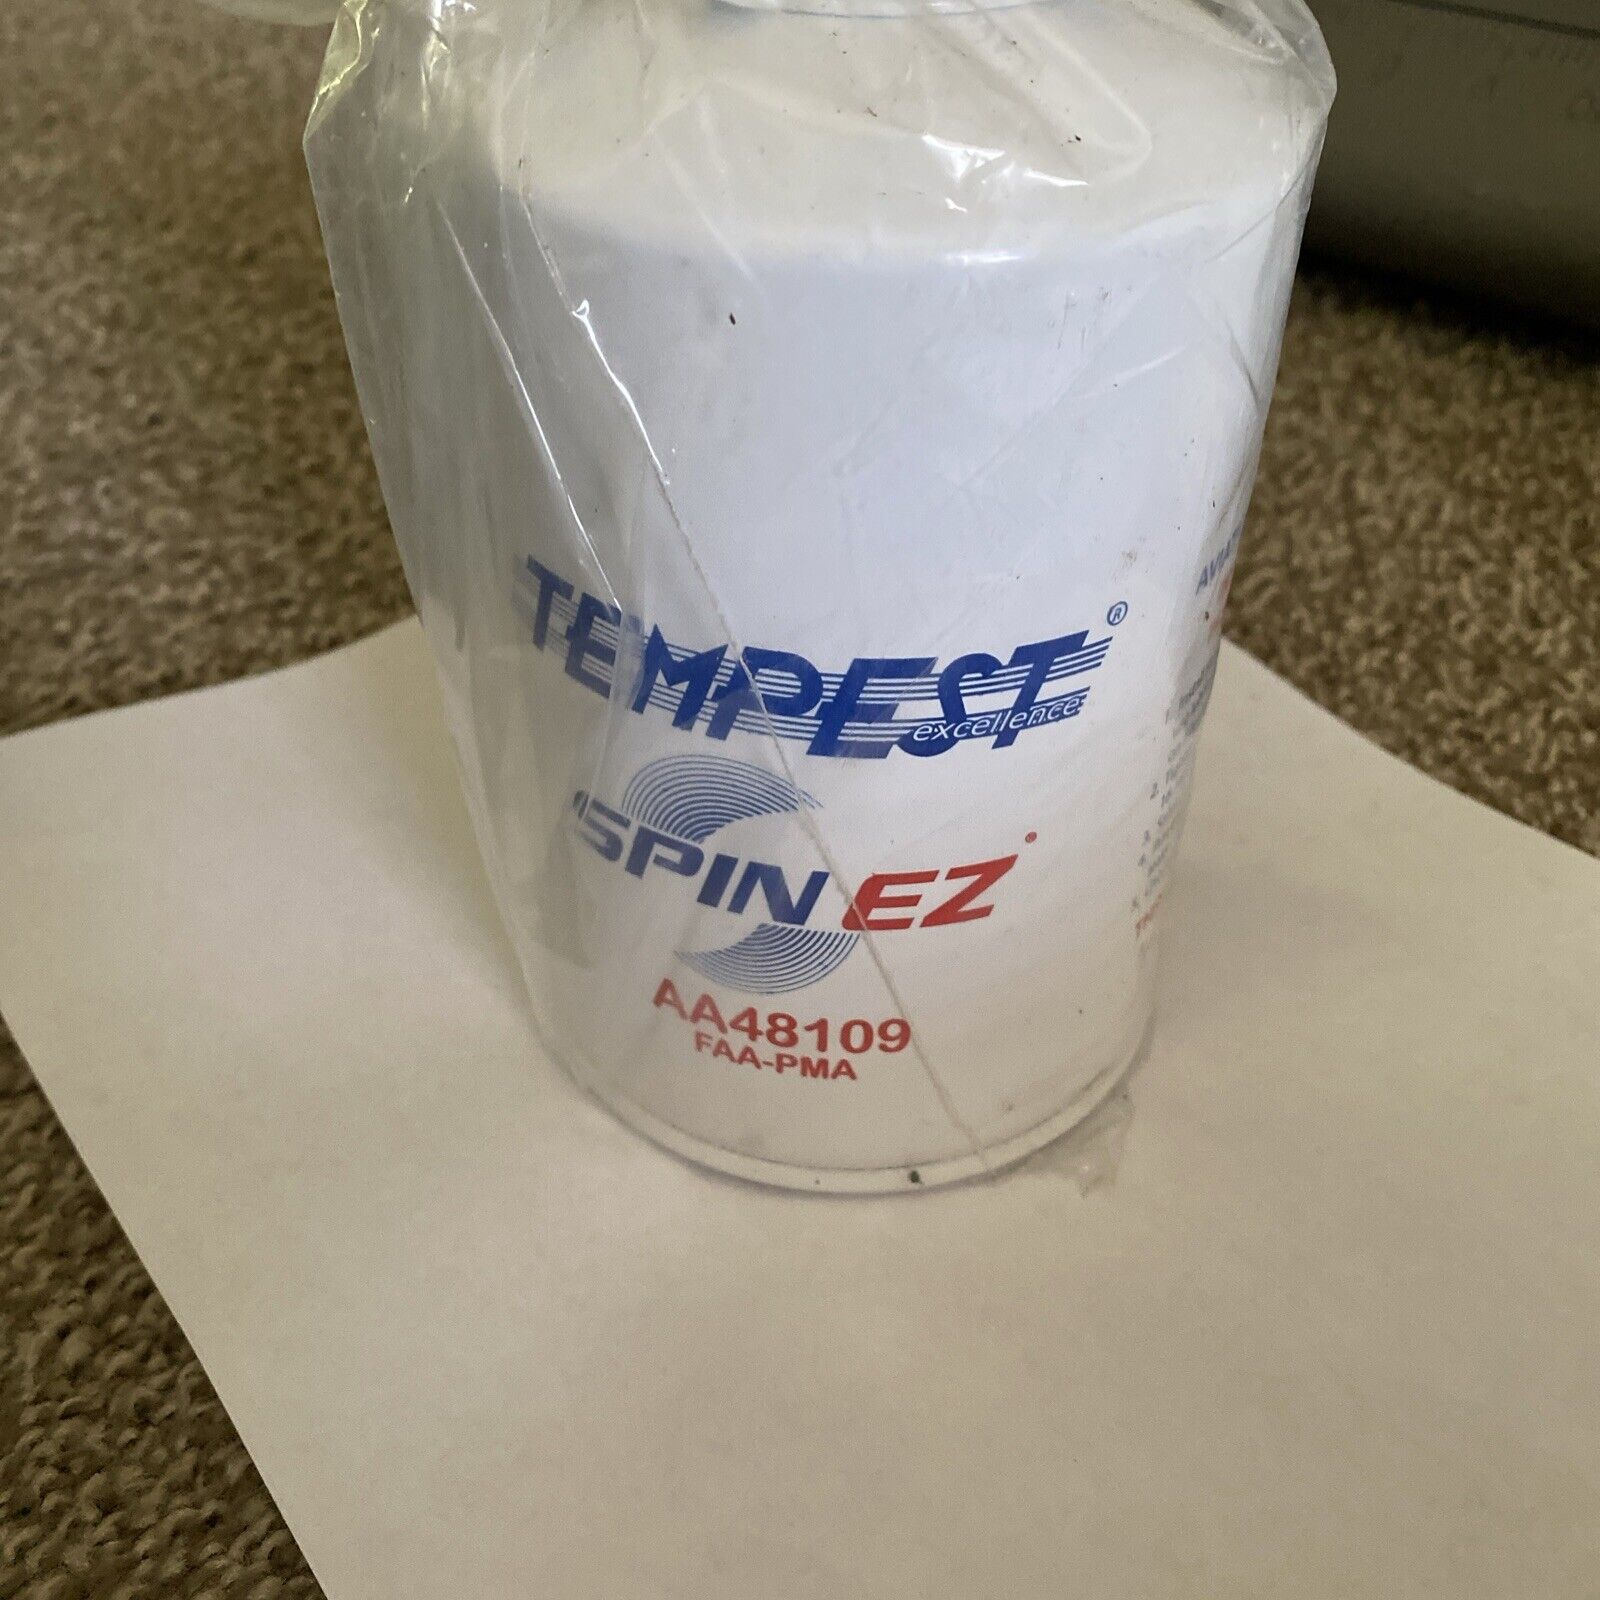 Tempest Aircraft Oil Filter - AA48109 SPIN EZ - Aviation Spin-On Oil Filter